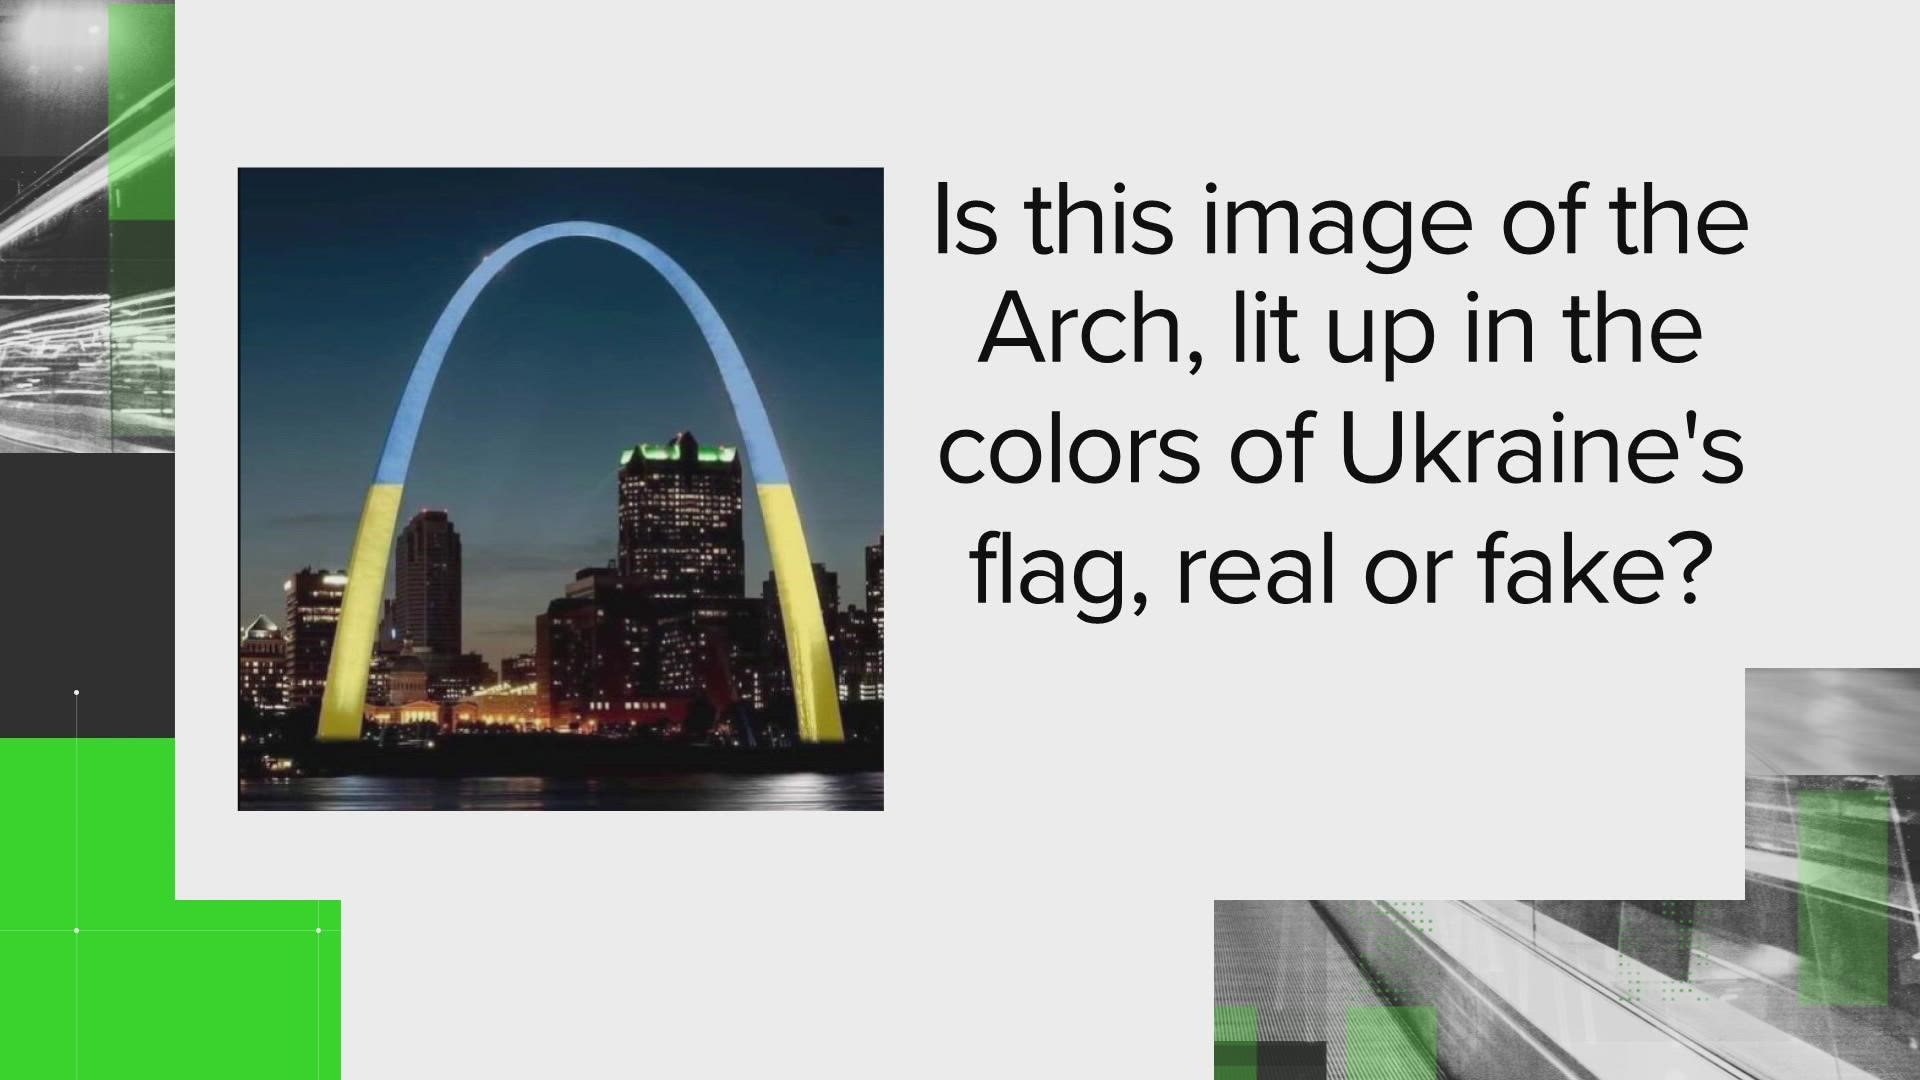 The Gateway Arch has not been lit up in the colors of Ukraine’s flag, and the shared photo is a colorized version of a stock image.